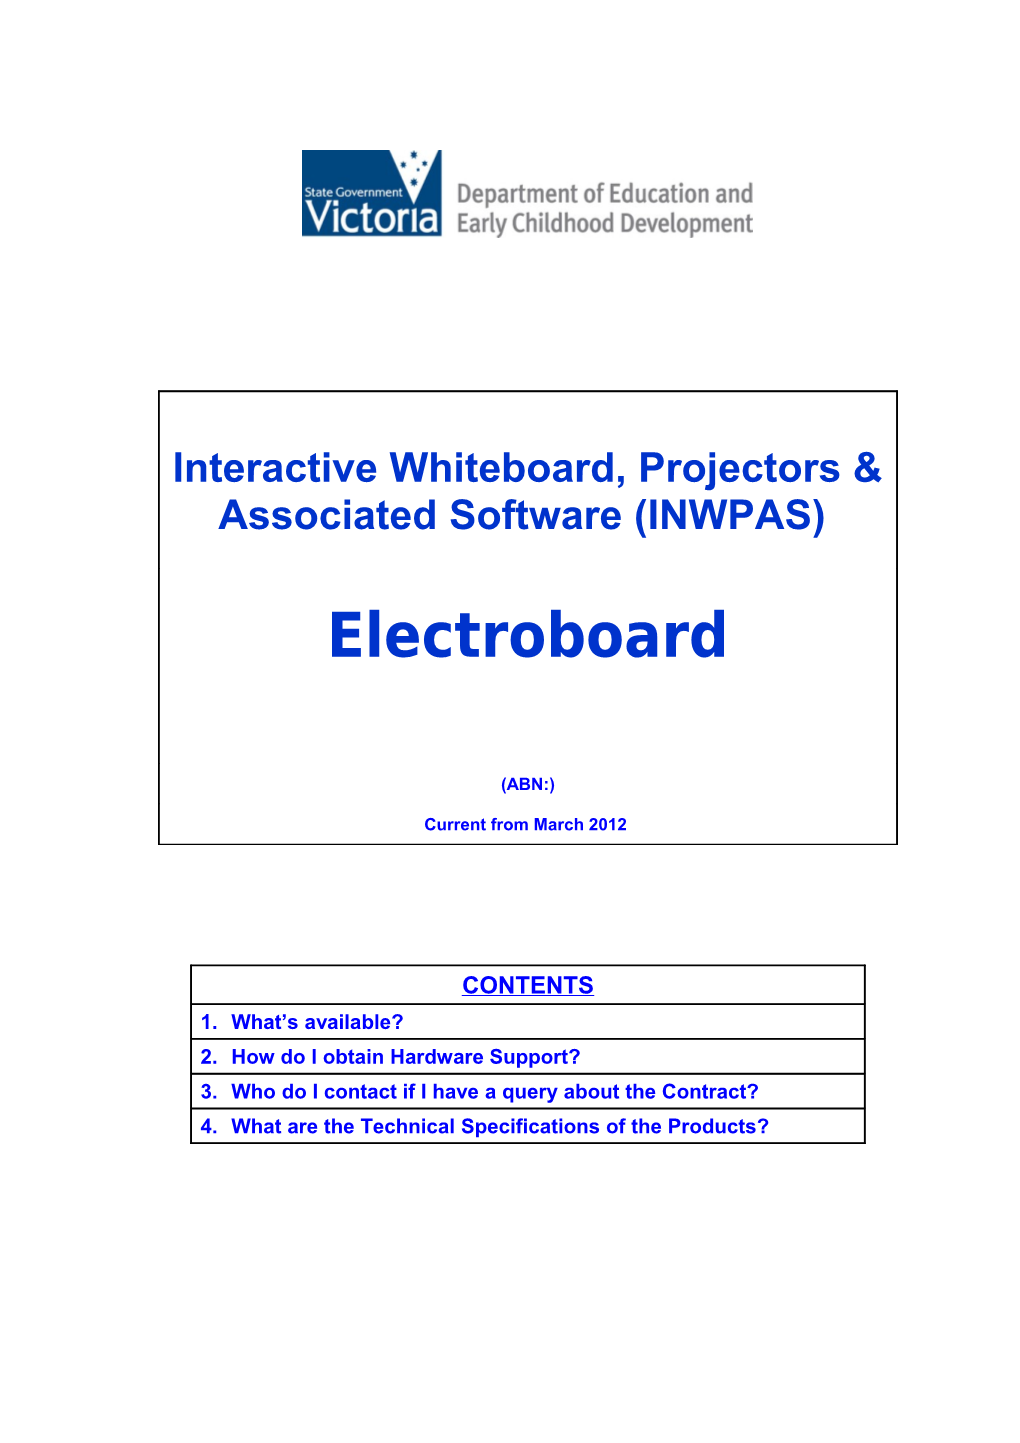 Interactive Whiteboard, Projectors and Associated Software